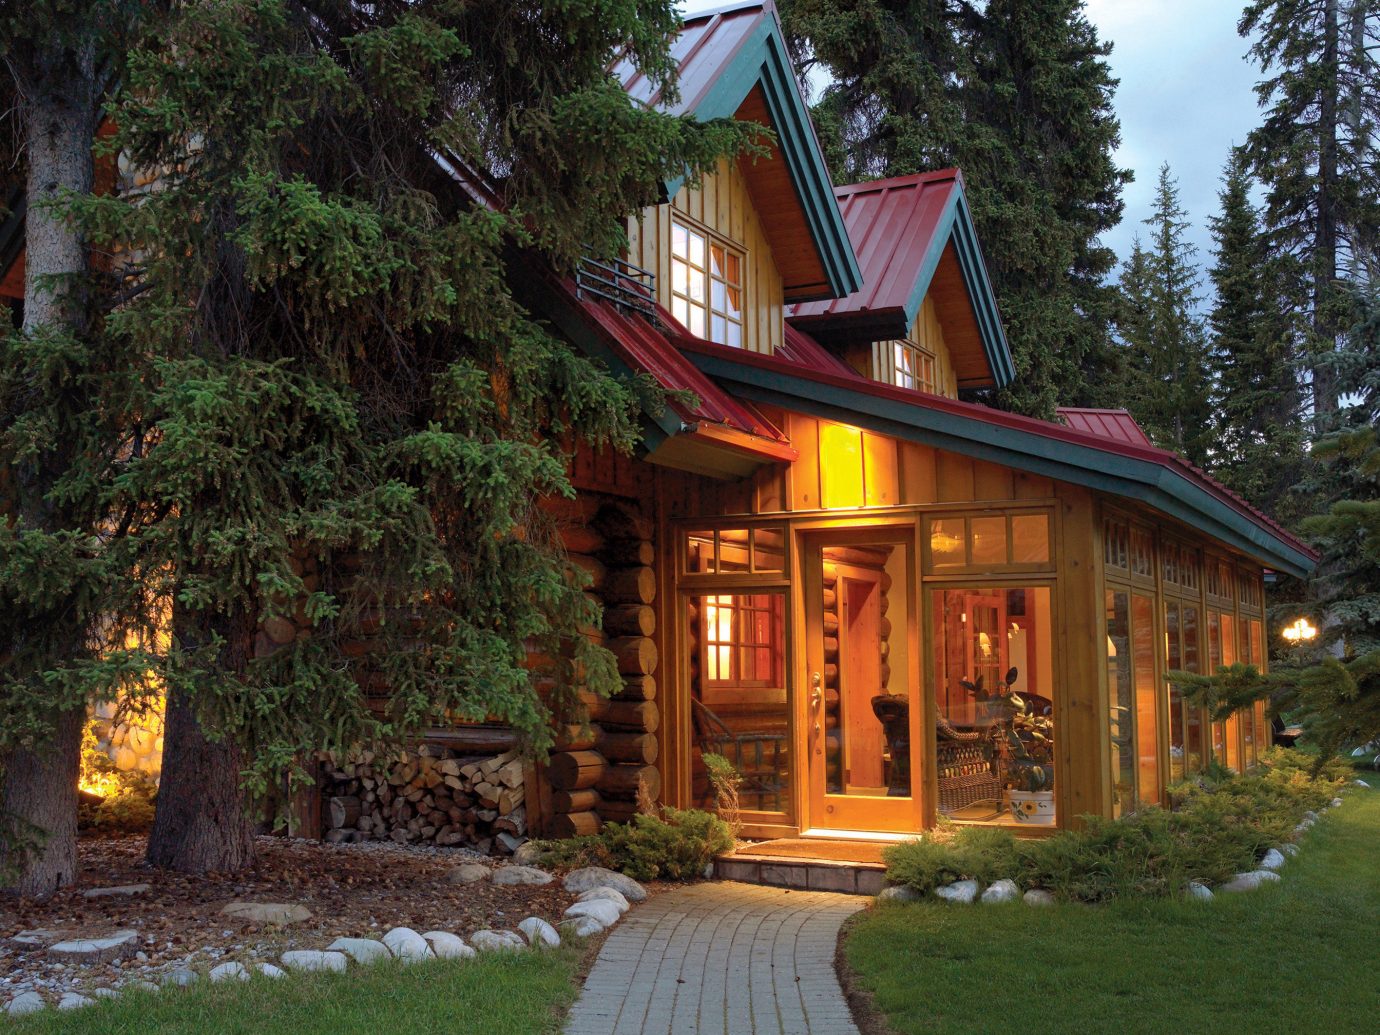 Alberta Architecture Boutique Hotels Canada Exterior Hotels Nature Rustic Scenic views home house cottage log cabin tree plant real estate lighting estate landscape outdoor structure facade evening building siding landscaping